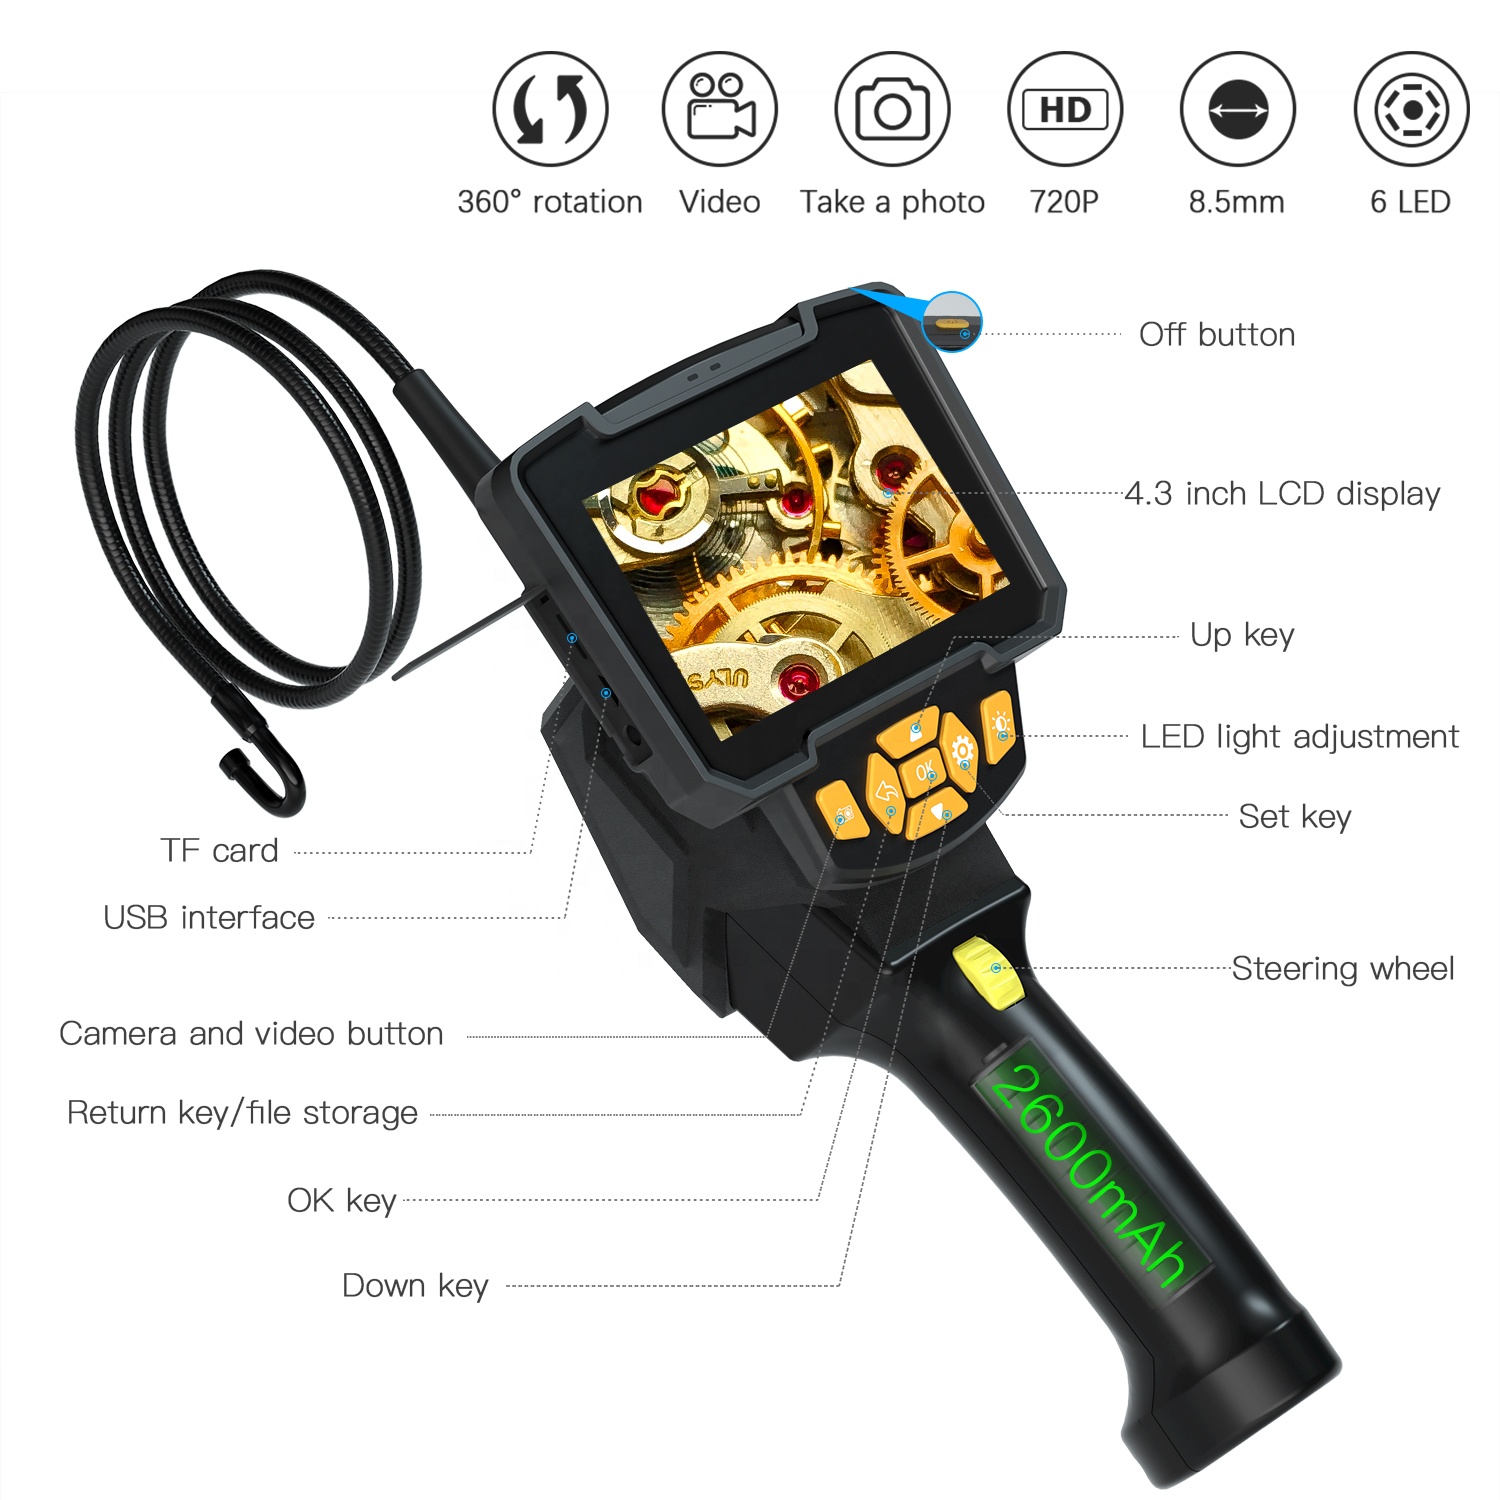 IK805 Mini Camera Car Rotary Endoscope for Android Smartphone Phones Pc Micro Usb Video 360 Degree Endoscopic Camcorder With Monitor